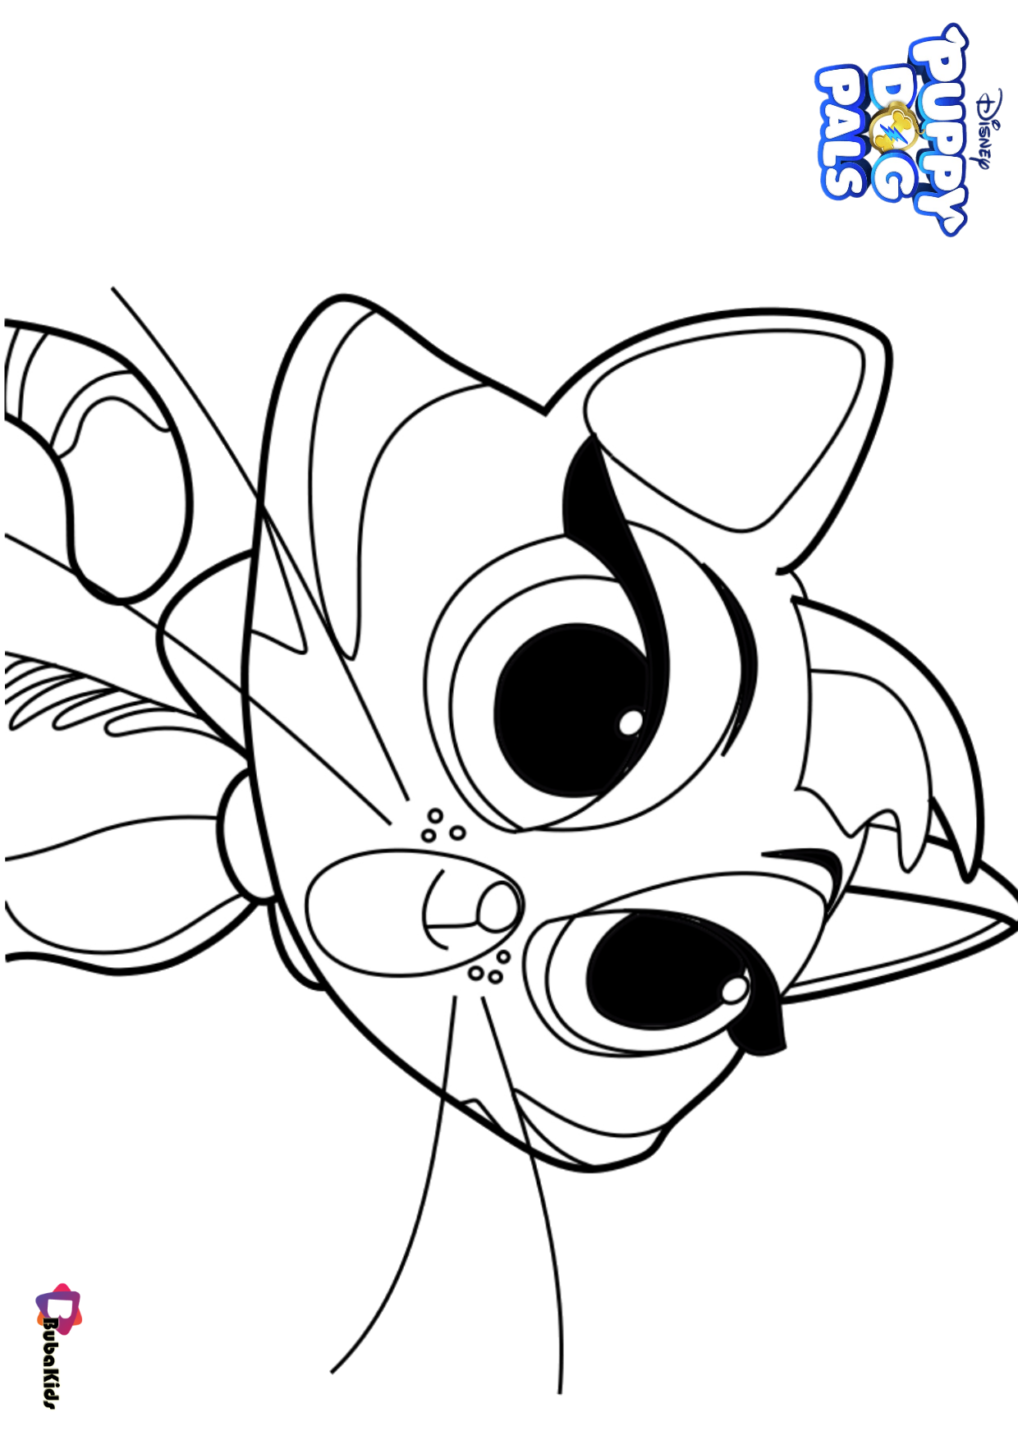 Hissy the purple cat Puppy Dog Pals Disney TV Series coloring page